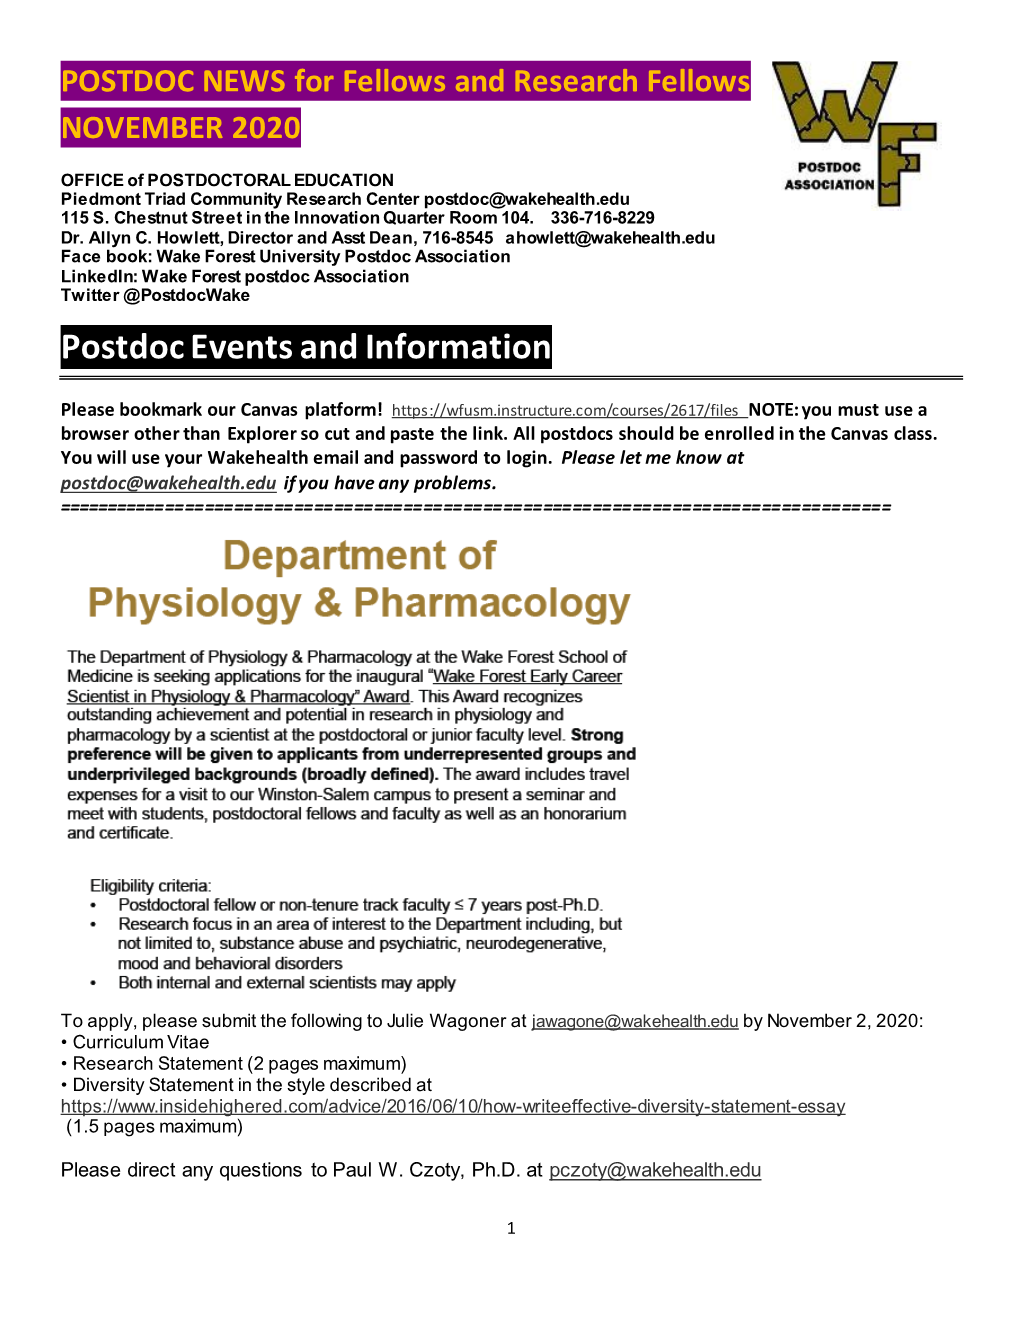 Postdoc Events and Information